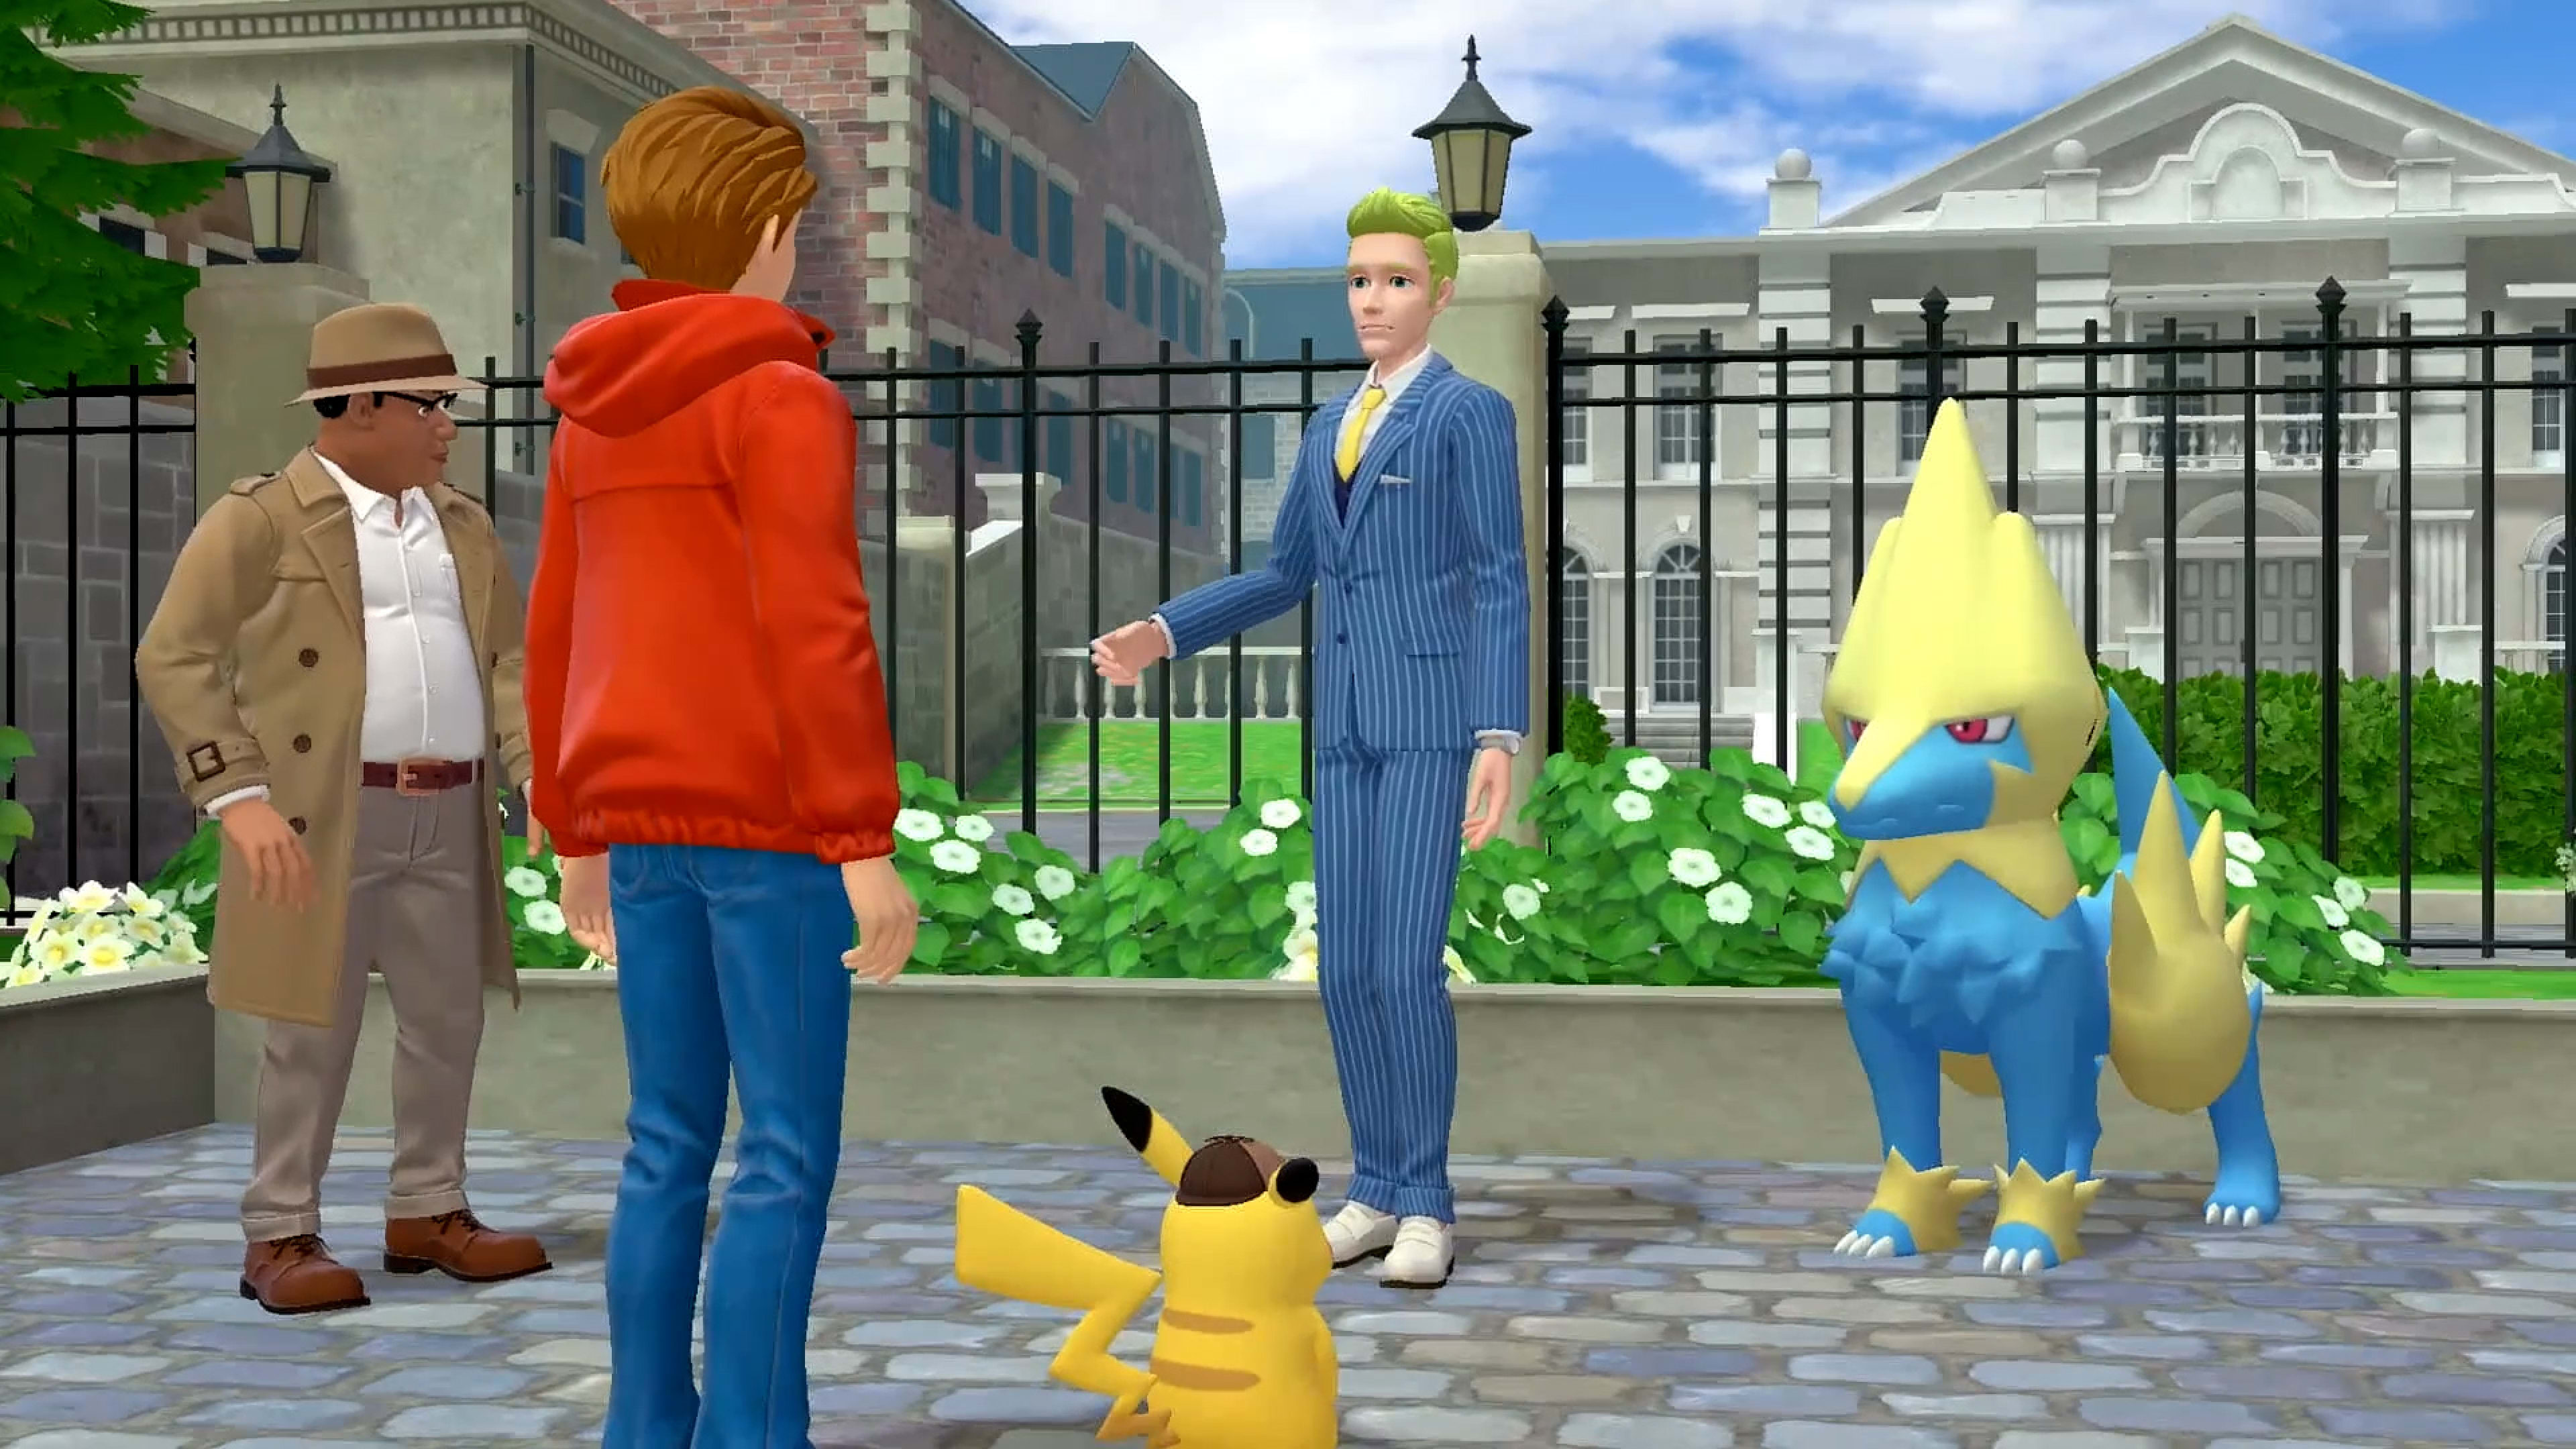 Tim Goodman and Pikachu talking with citizens of Ryme City